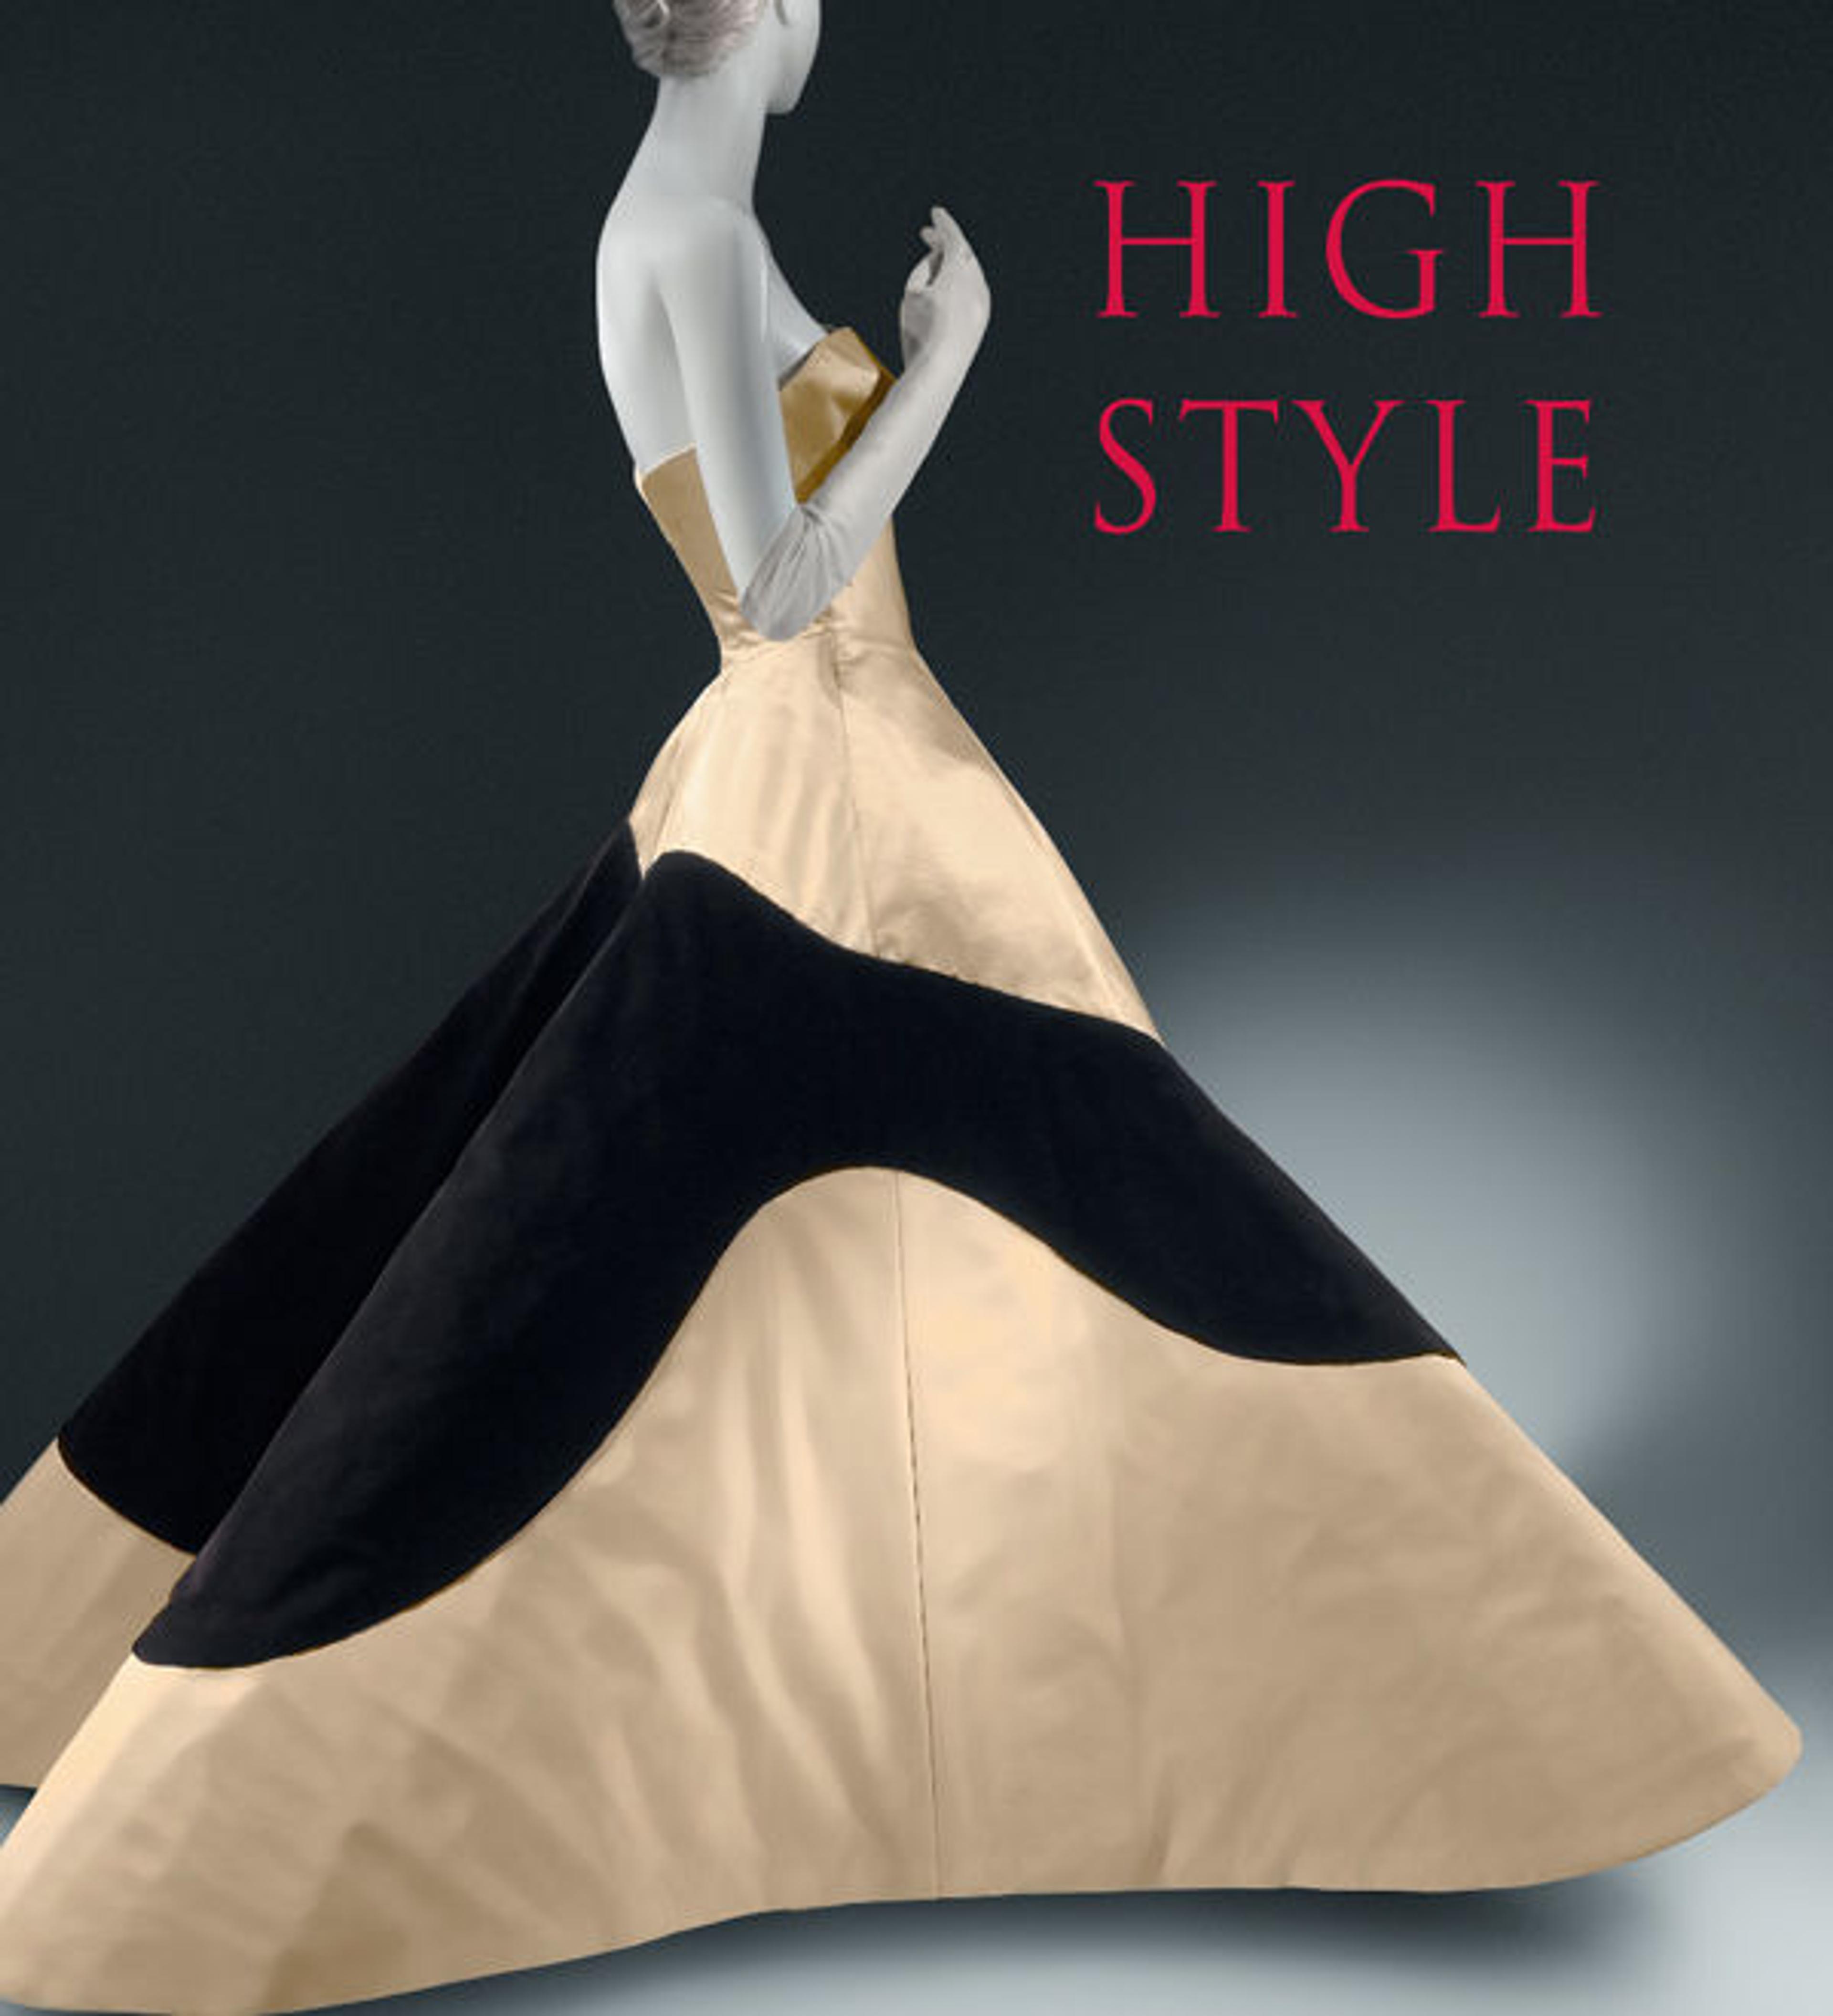 High Style: Masterworks from the Brooklyn Museum Costume Collection at The Metropolitan Museum of Art, by Jan Glier Reeder, features 355 full-color illustrations and is available at The Met Store and MetPublications.